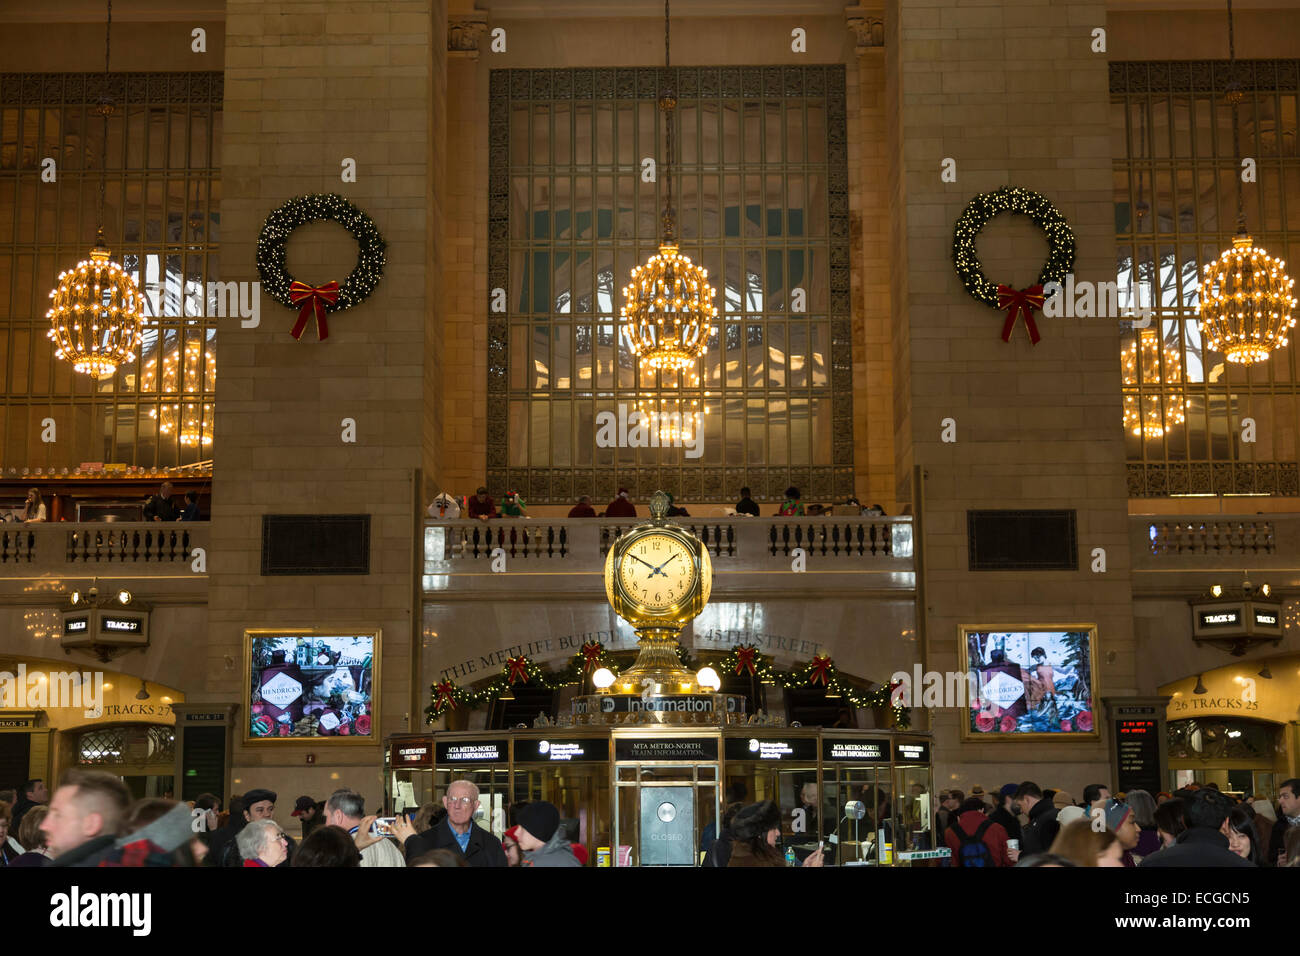 Clock and Information Booth during Holidays, Grand Central Terminal, NYC, USA Stock Photo